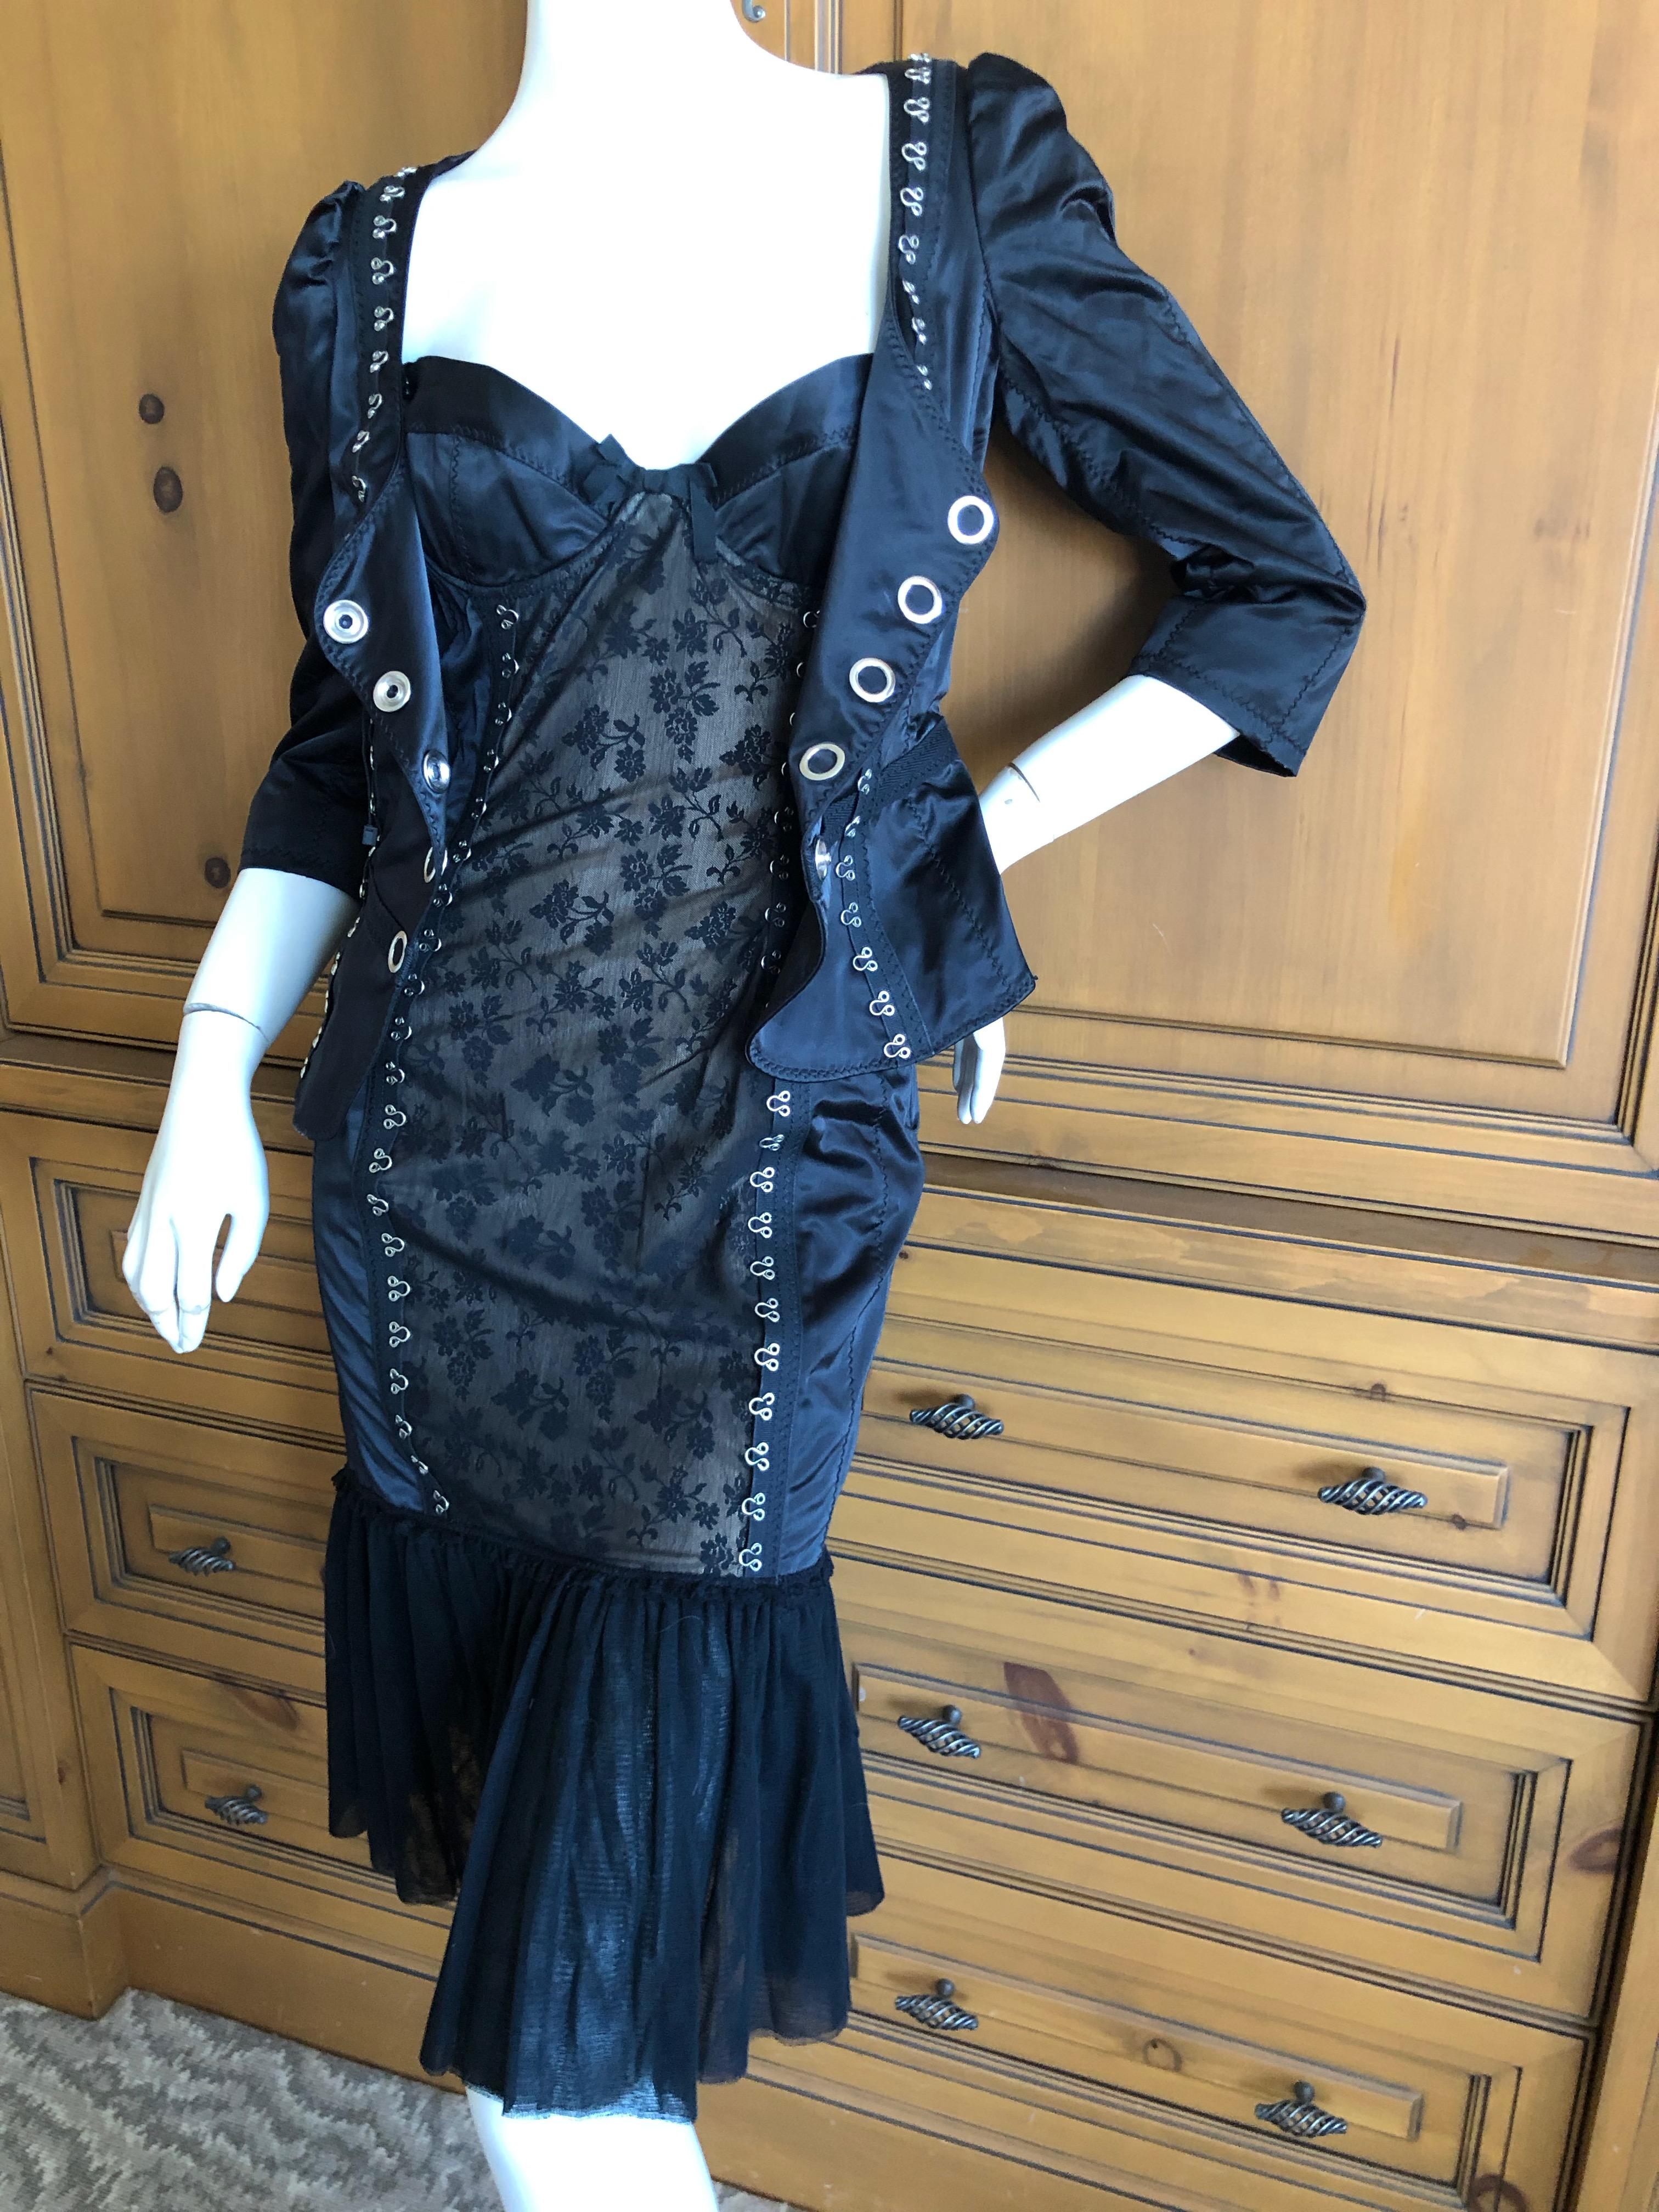 Moschino Cheap & Chic Vintage LBD Dress and Jacket with Corset Stay Details New For Sale 4